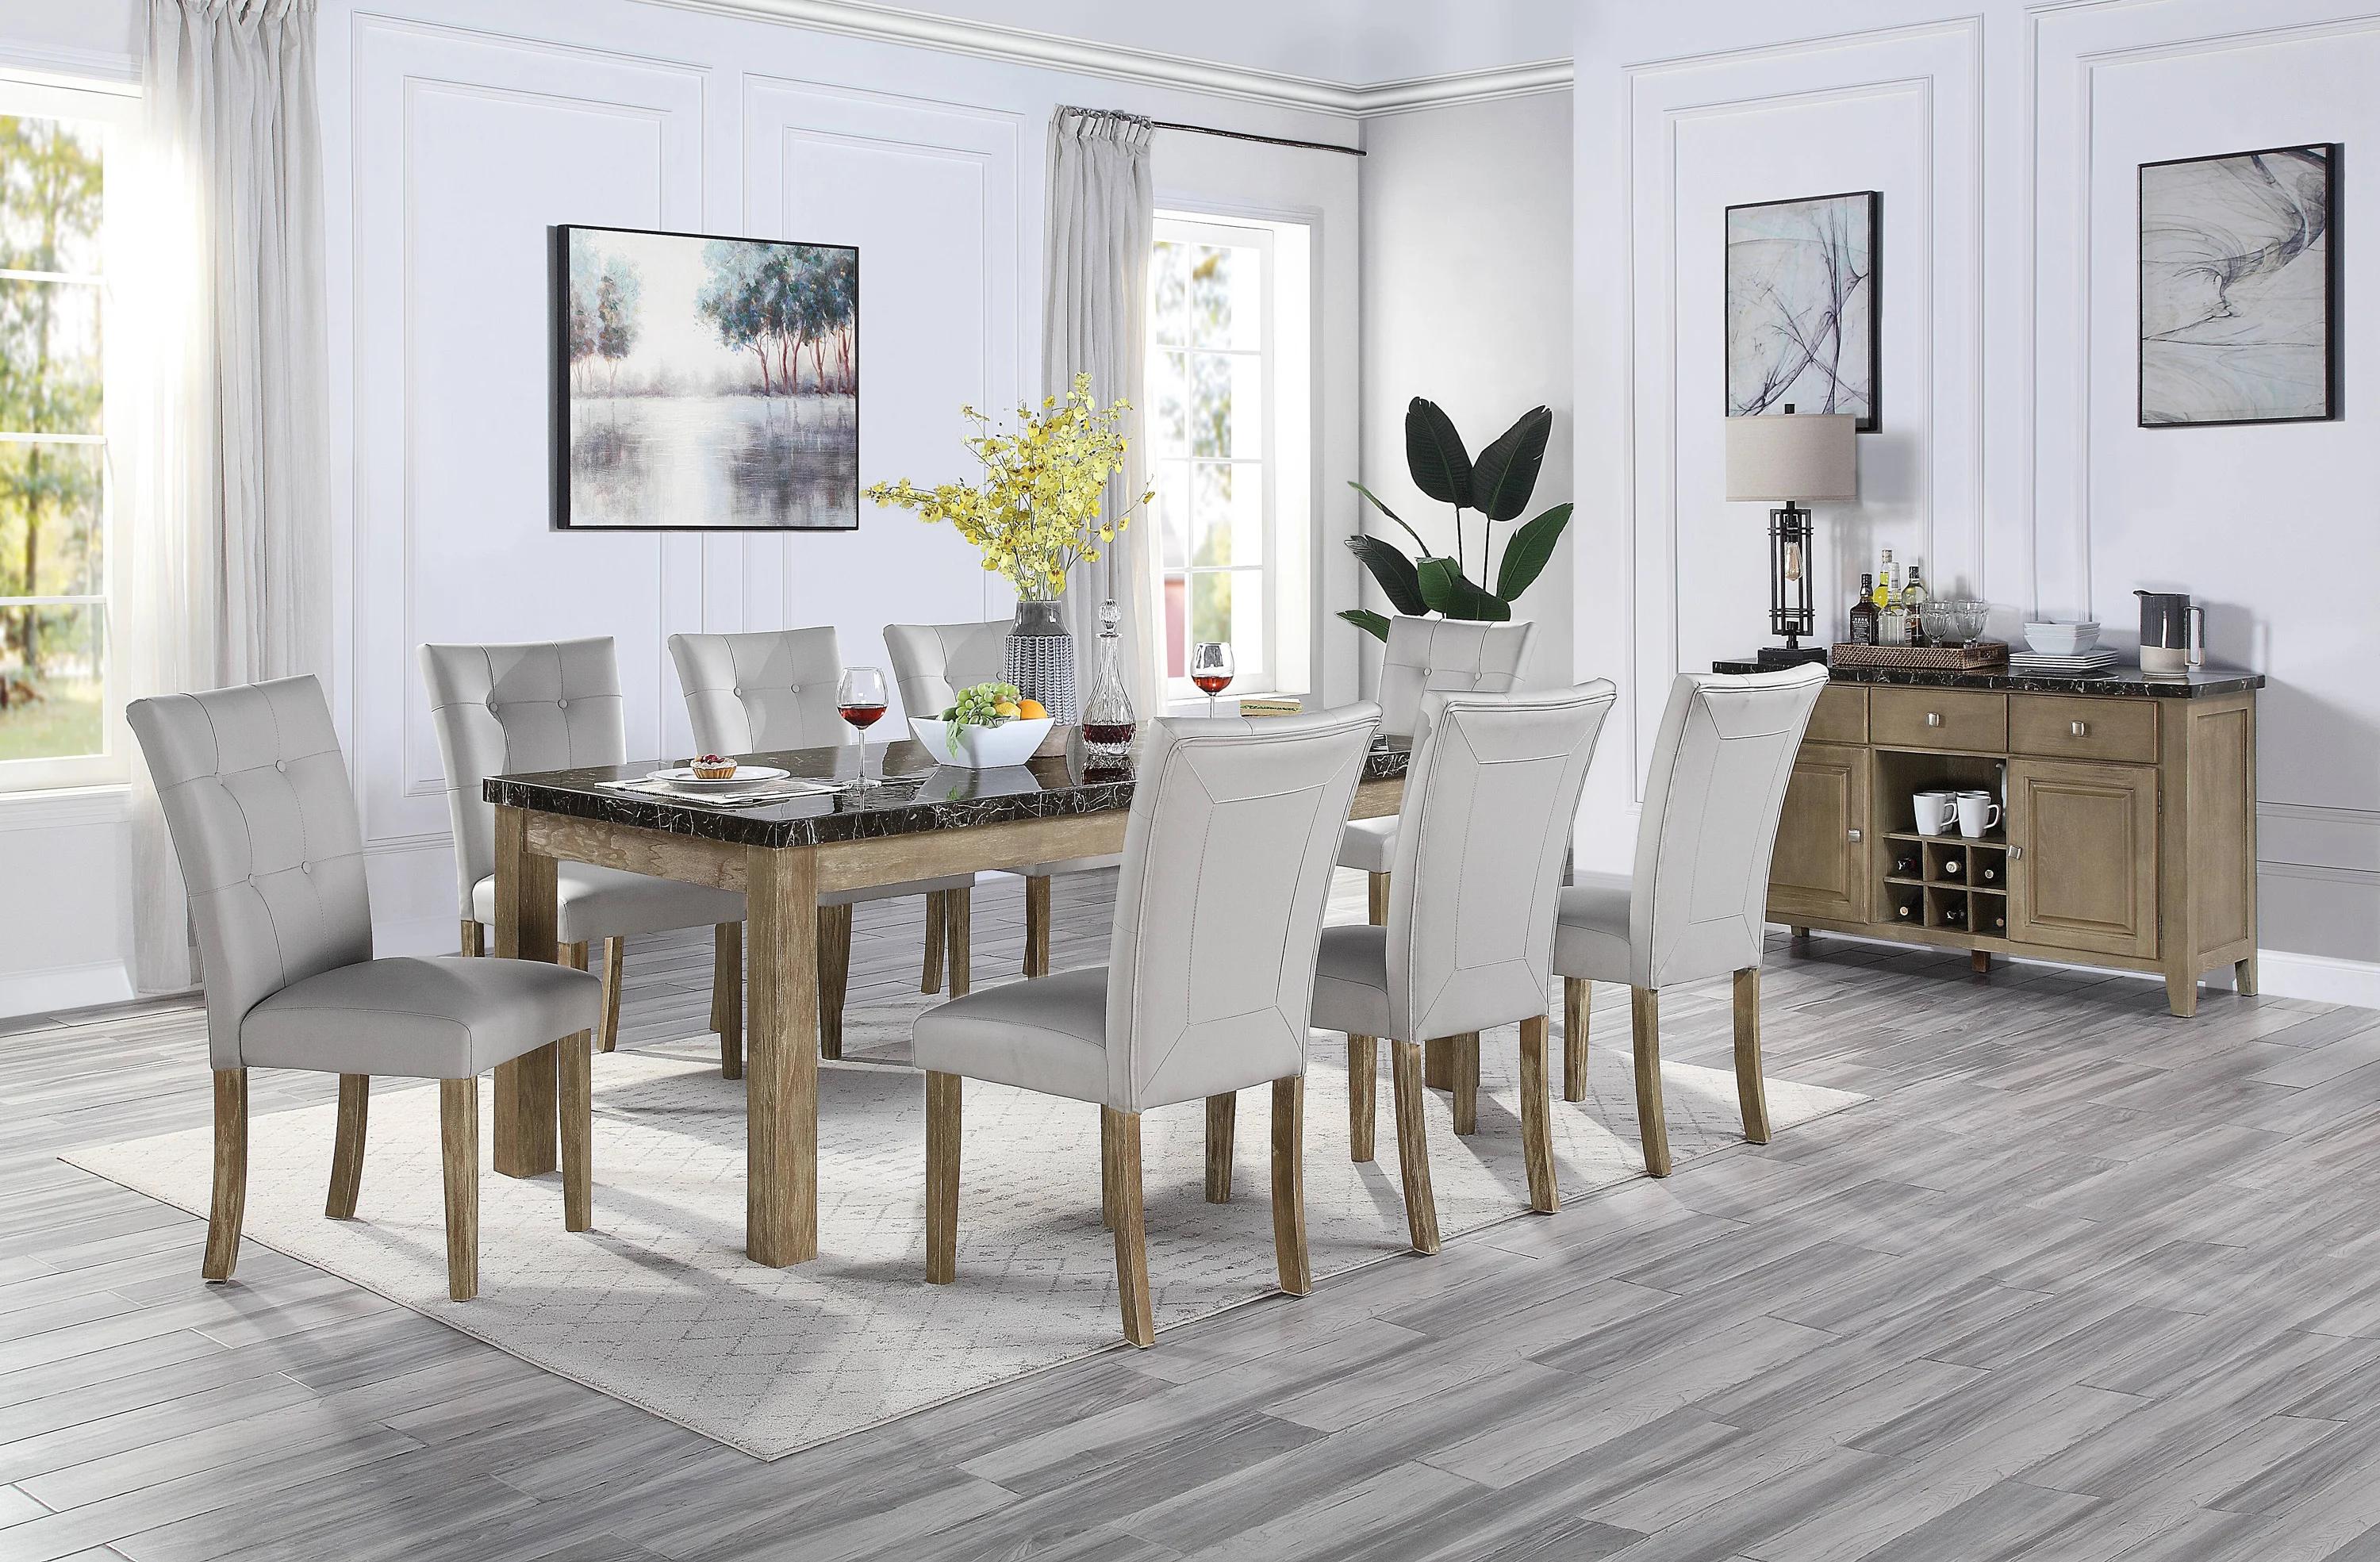 Transitional Dining Room Set Charnell DN00553-7pcs in Oak PU